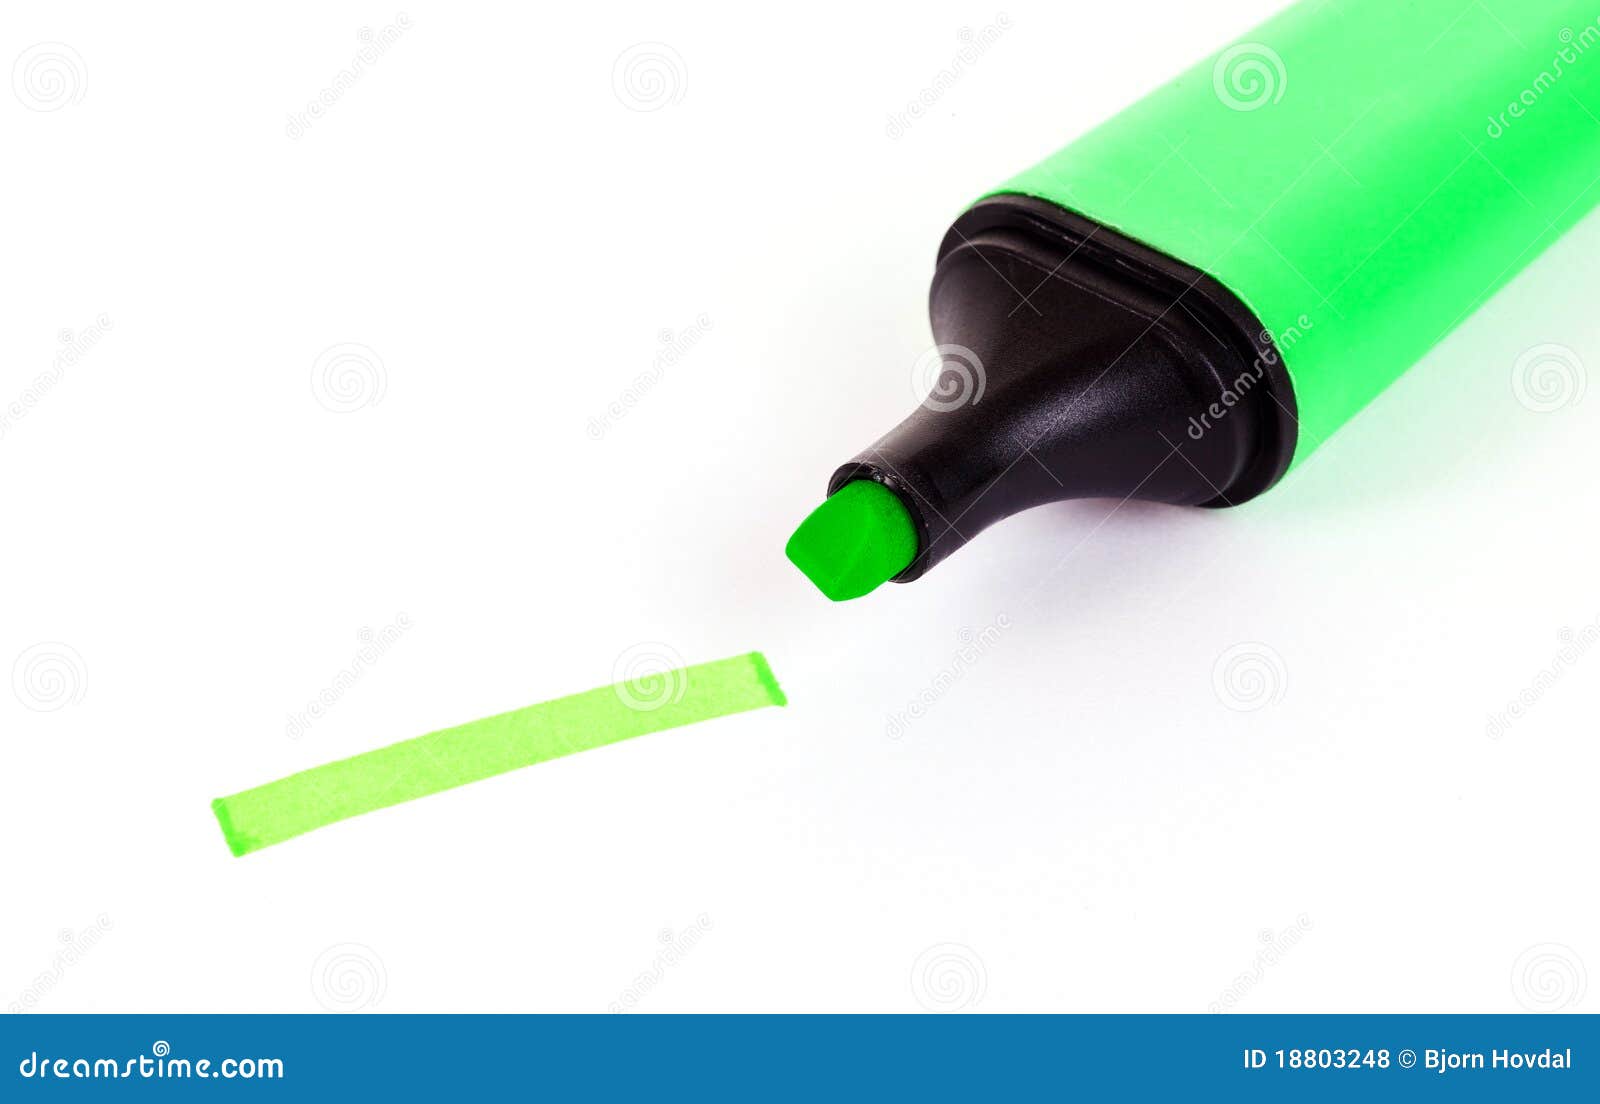 floor mustard base Green marker stock photo. Image of office, colored, school - 18803248